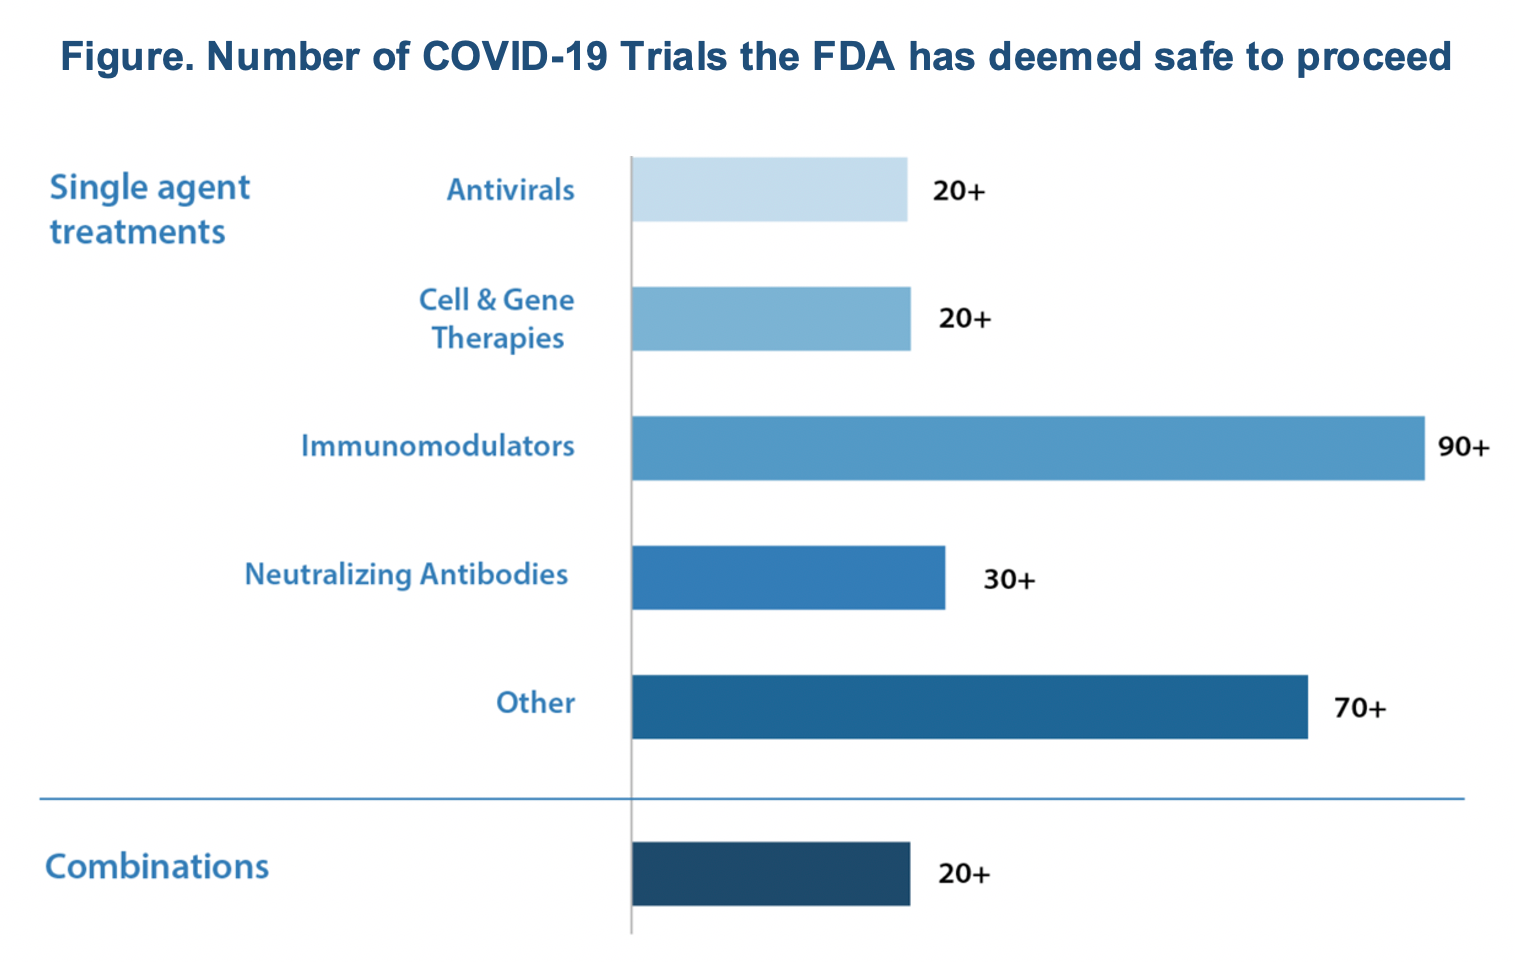 By far, immunomodulators are the dominant type of drugs under investigation as possible treatments for COVID-19 and related conditions.